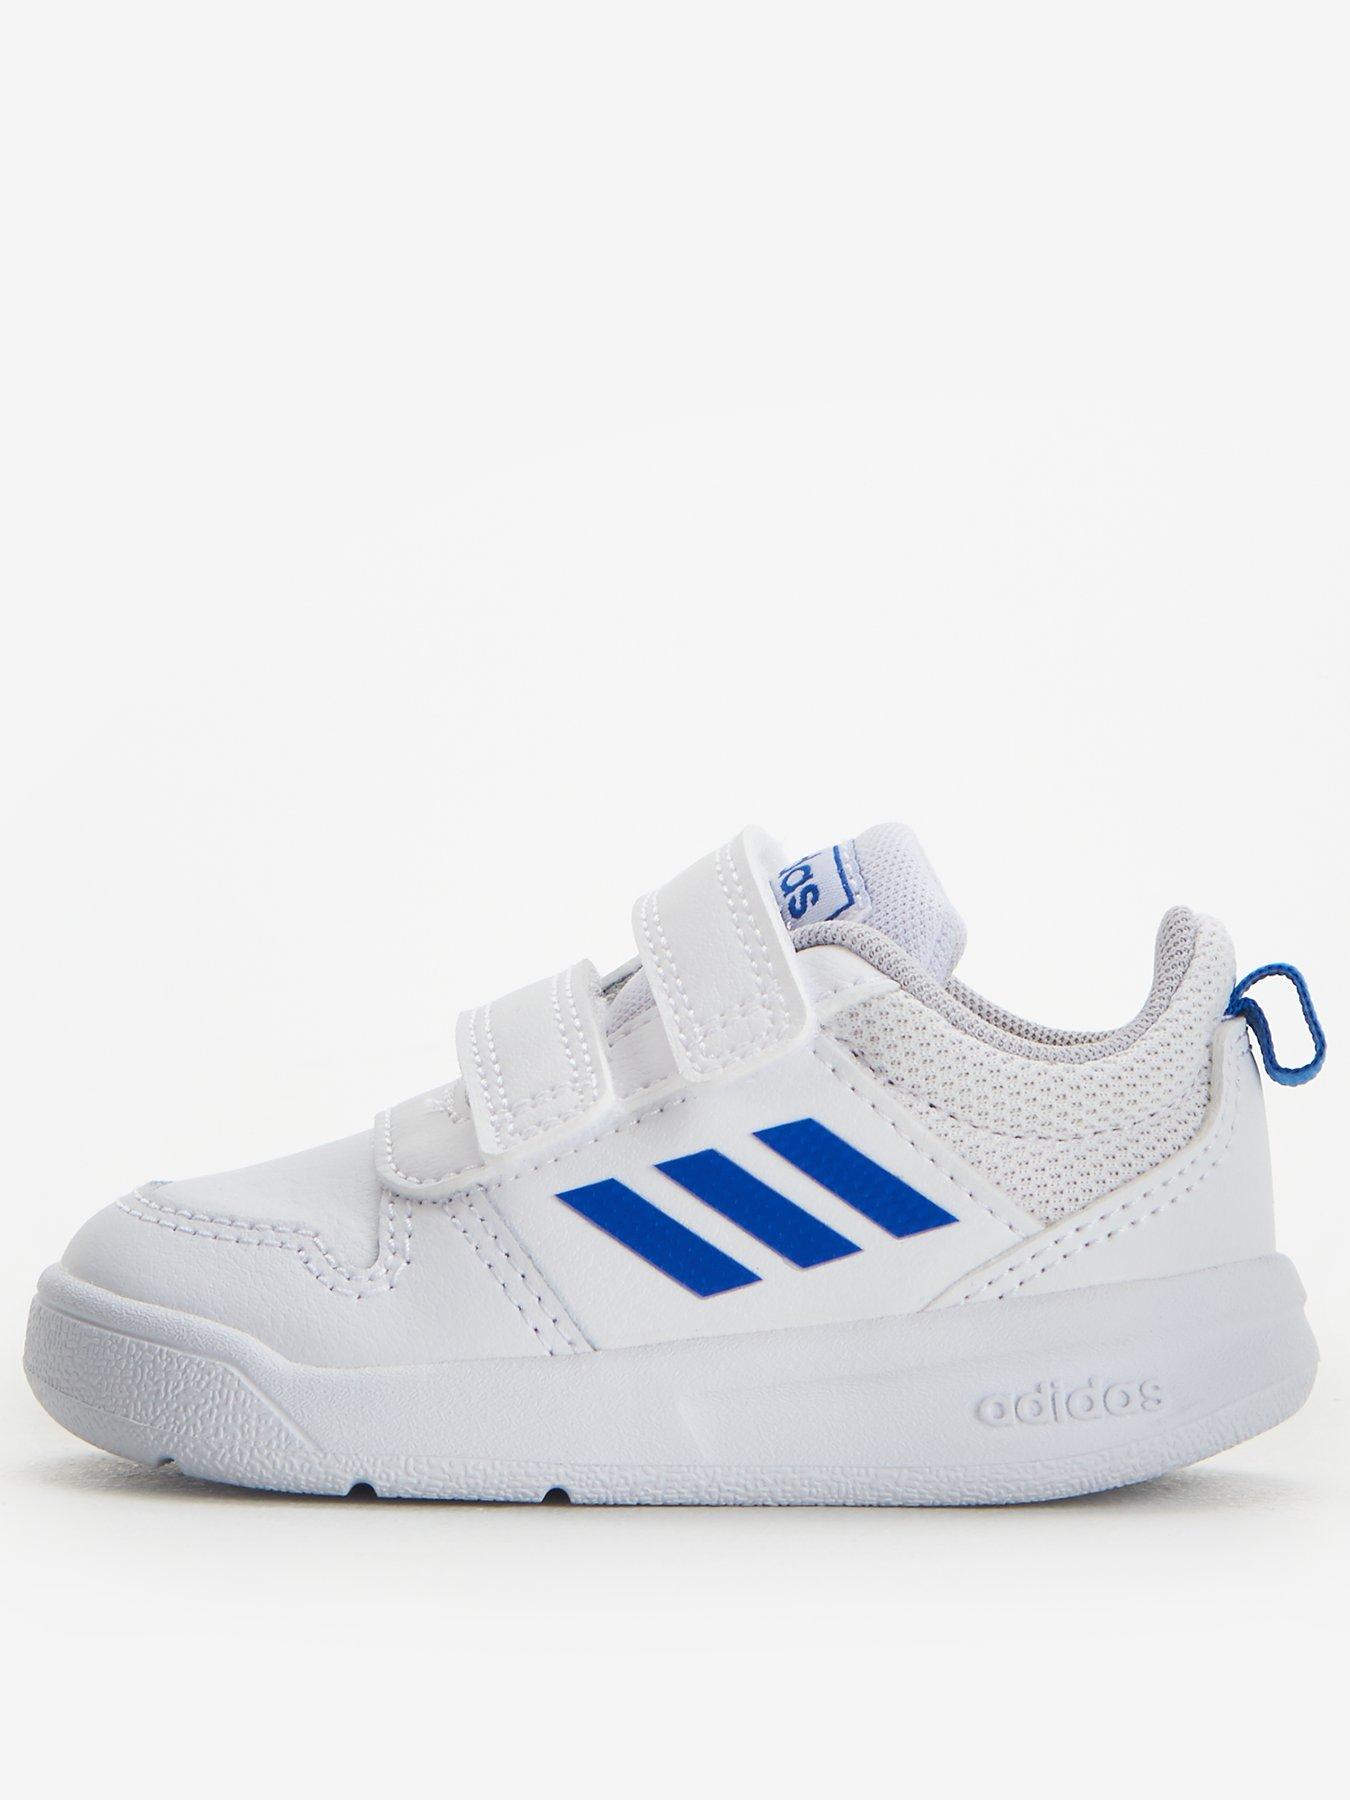 adidas trainers white and blue